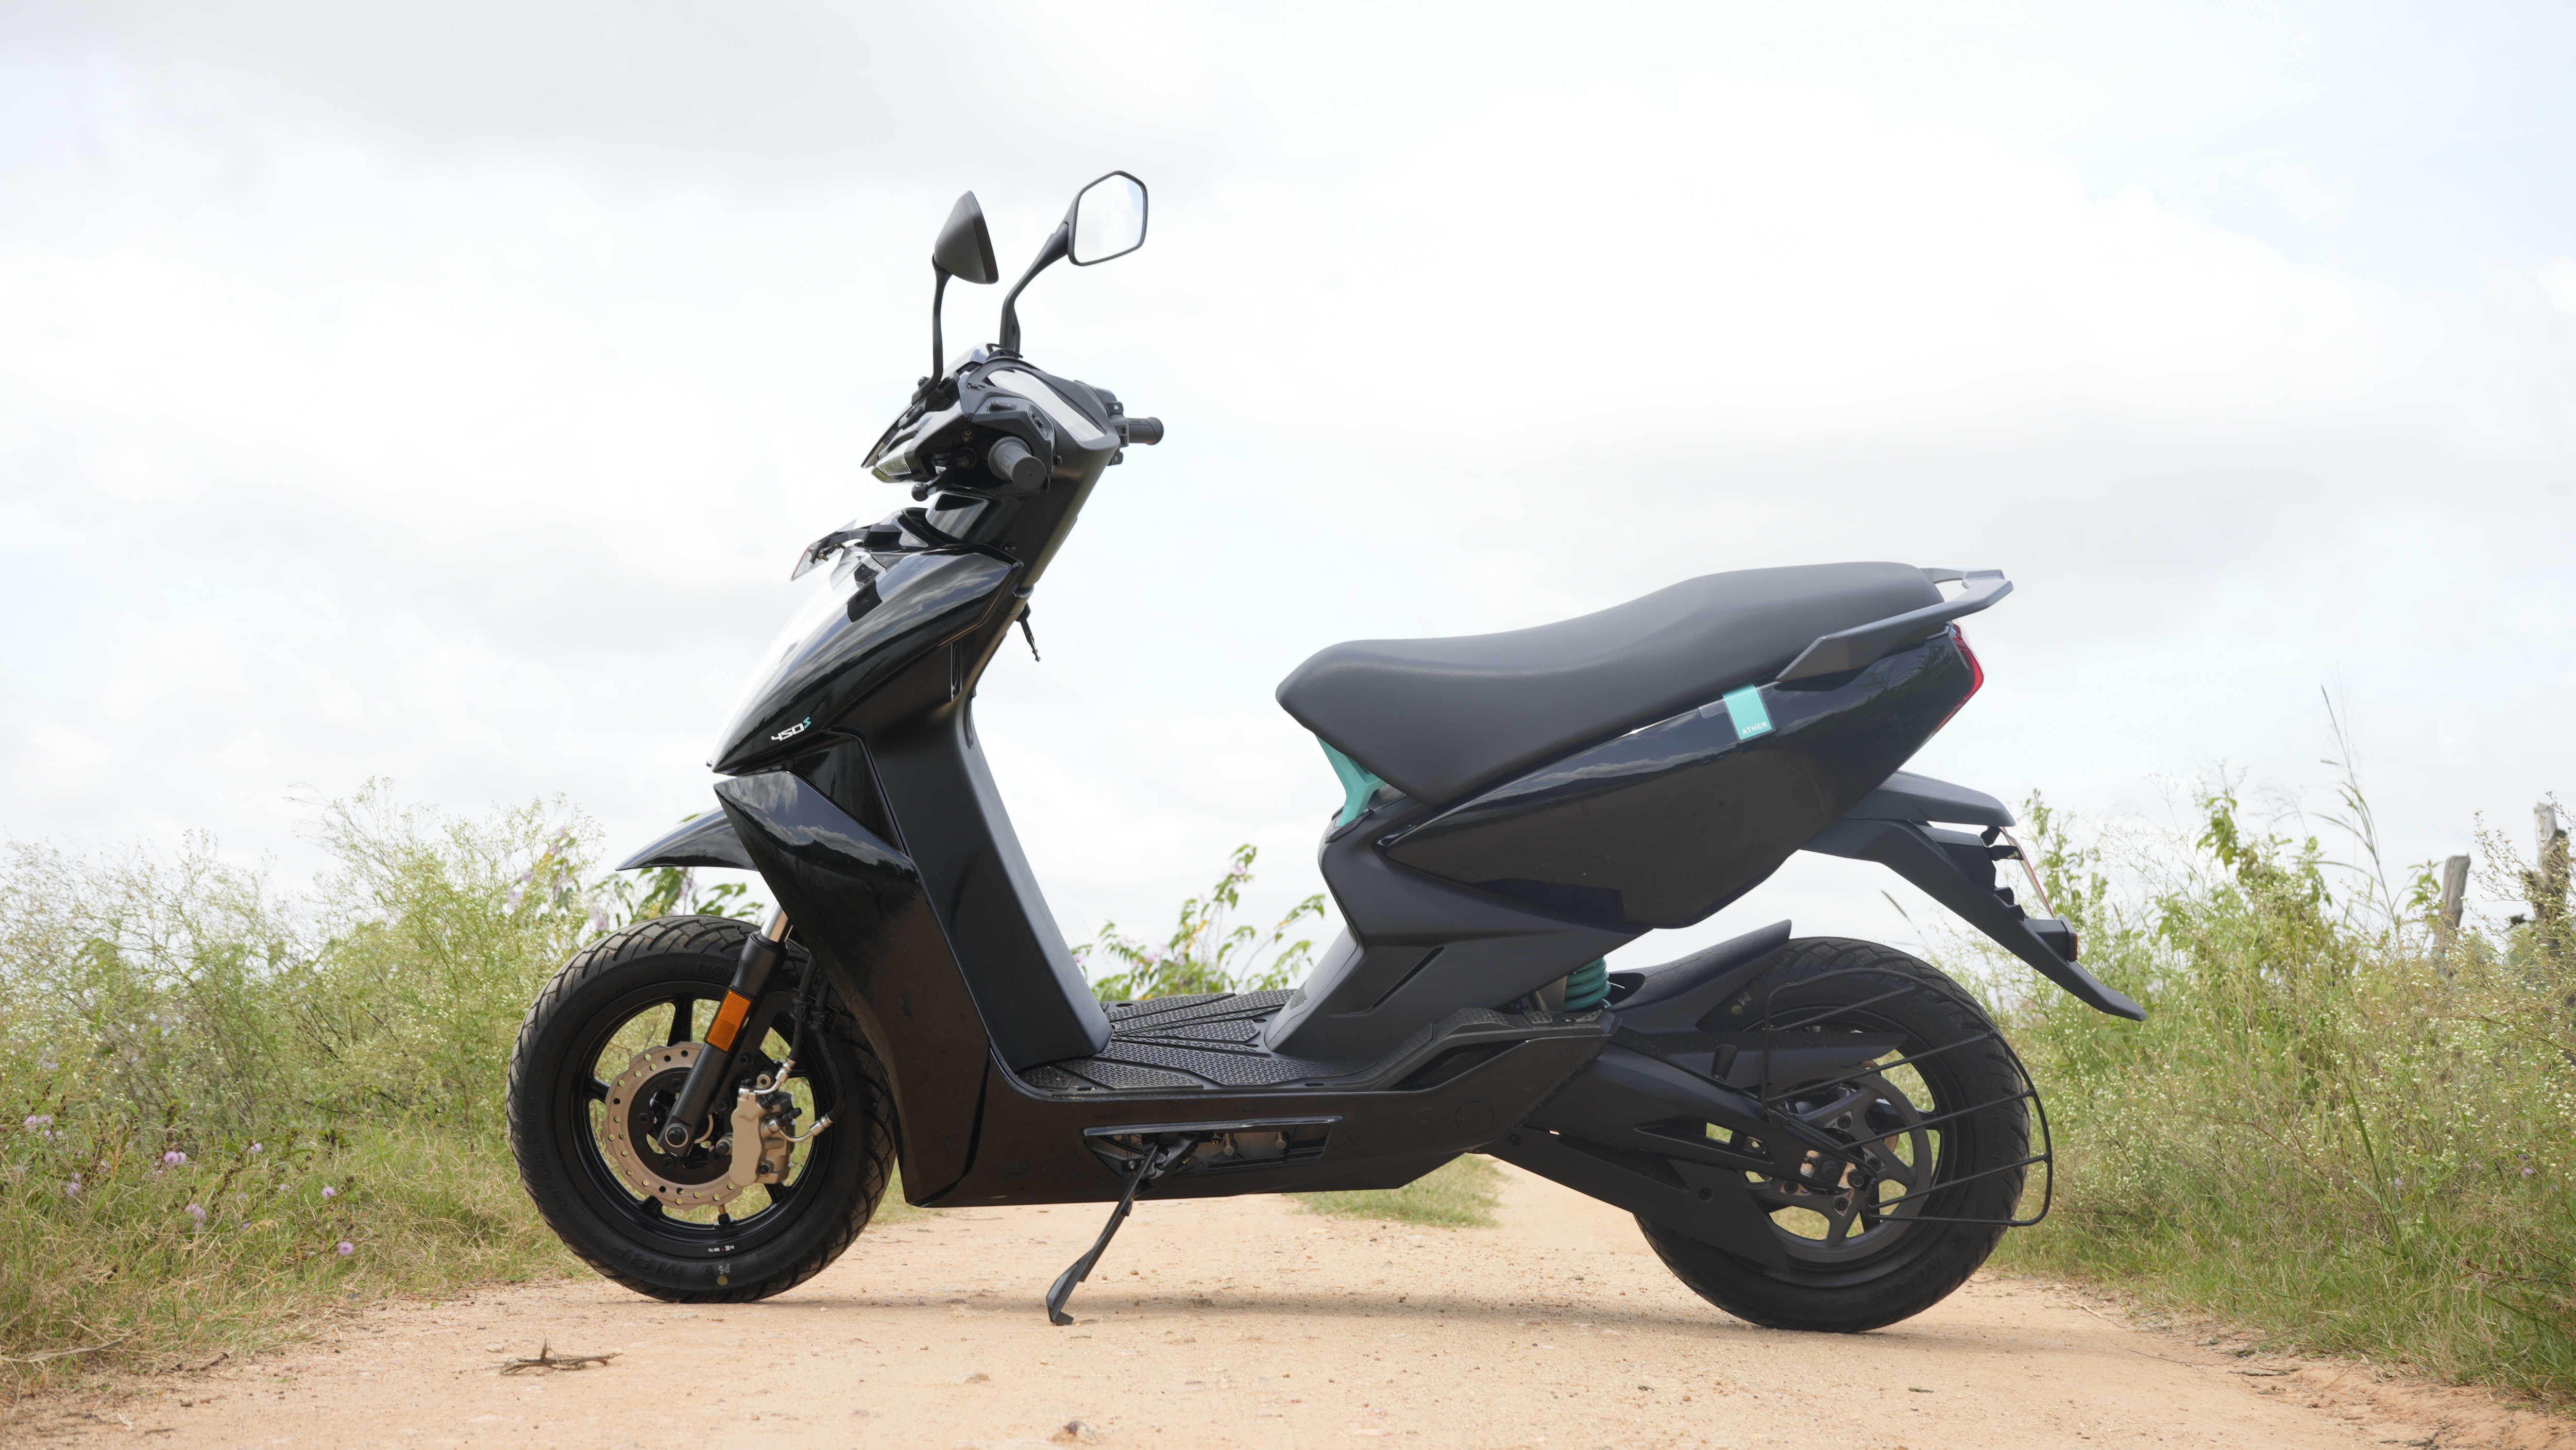 Ather 450S promises to run a 115 km range on a single charge, but the true range is around 90 km and that too depends on road conditions, and riding mode being used.